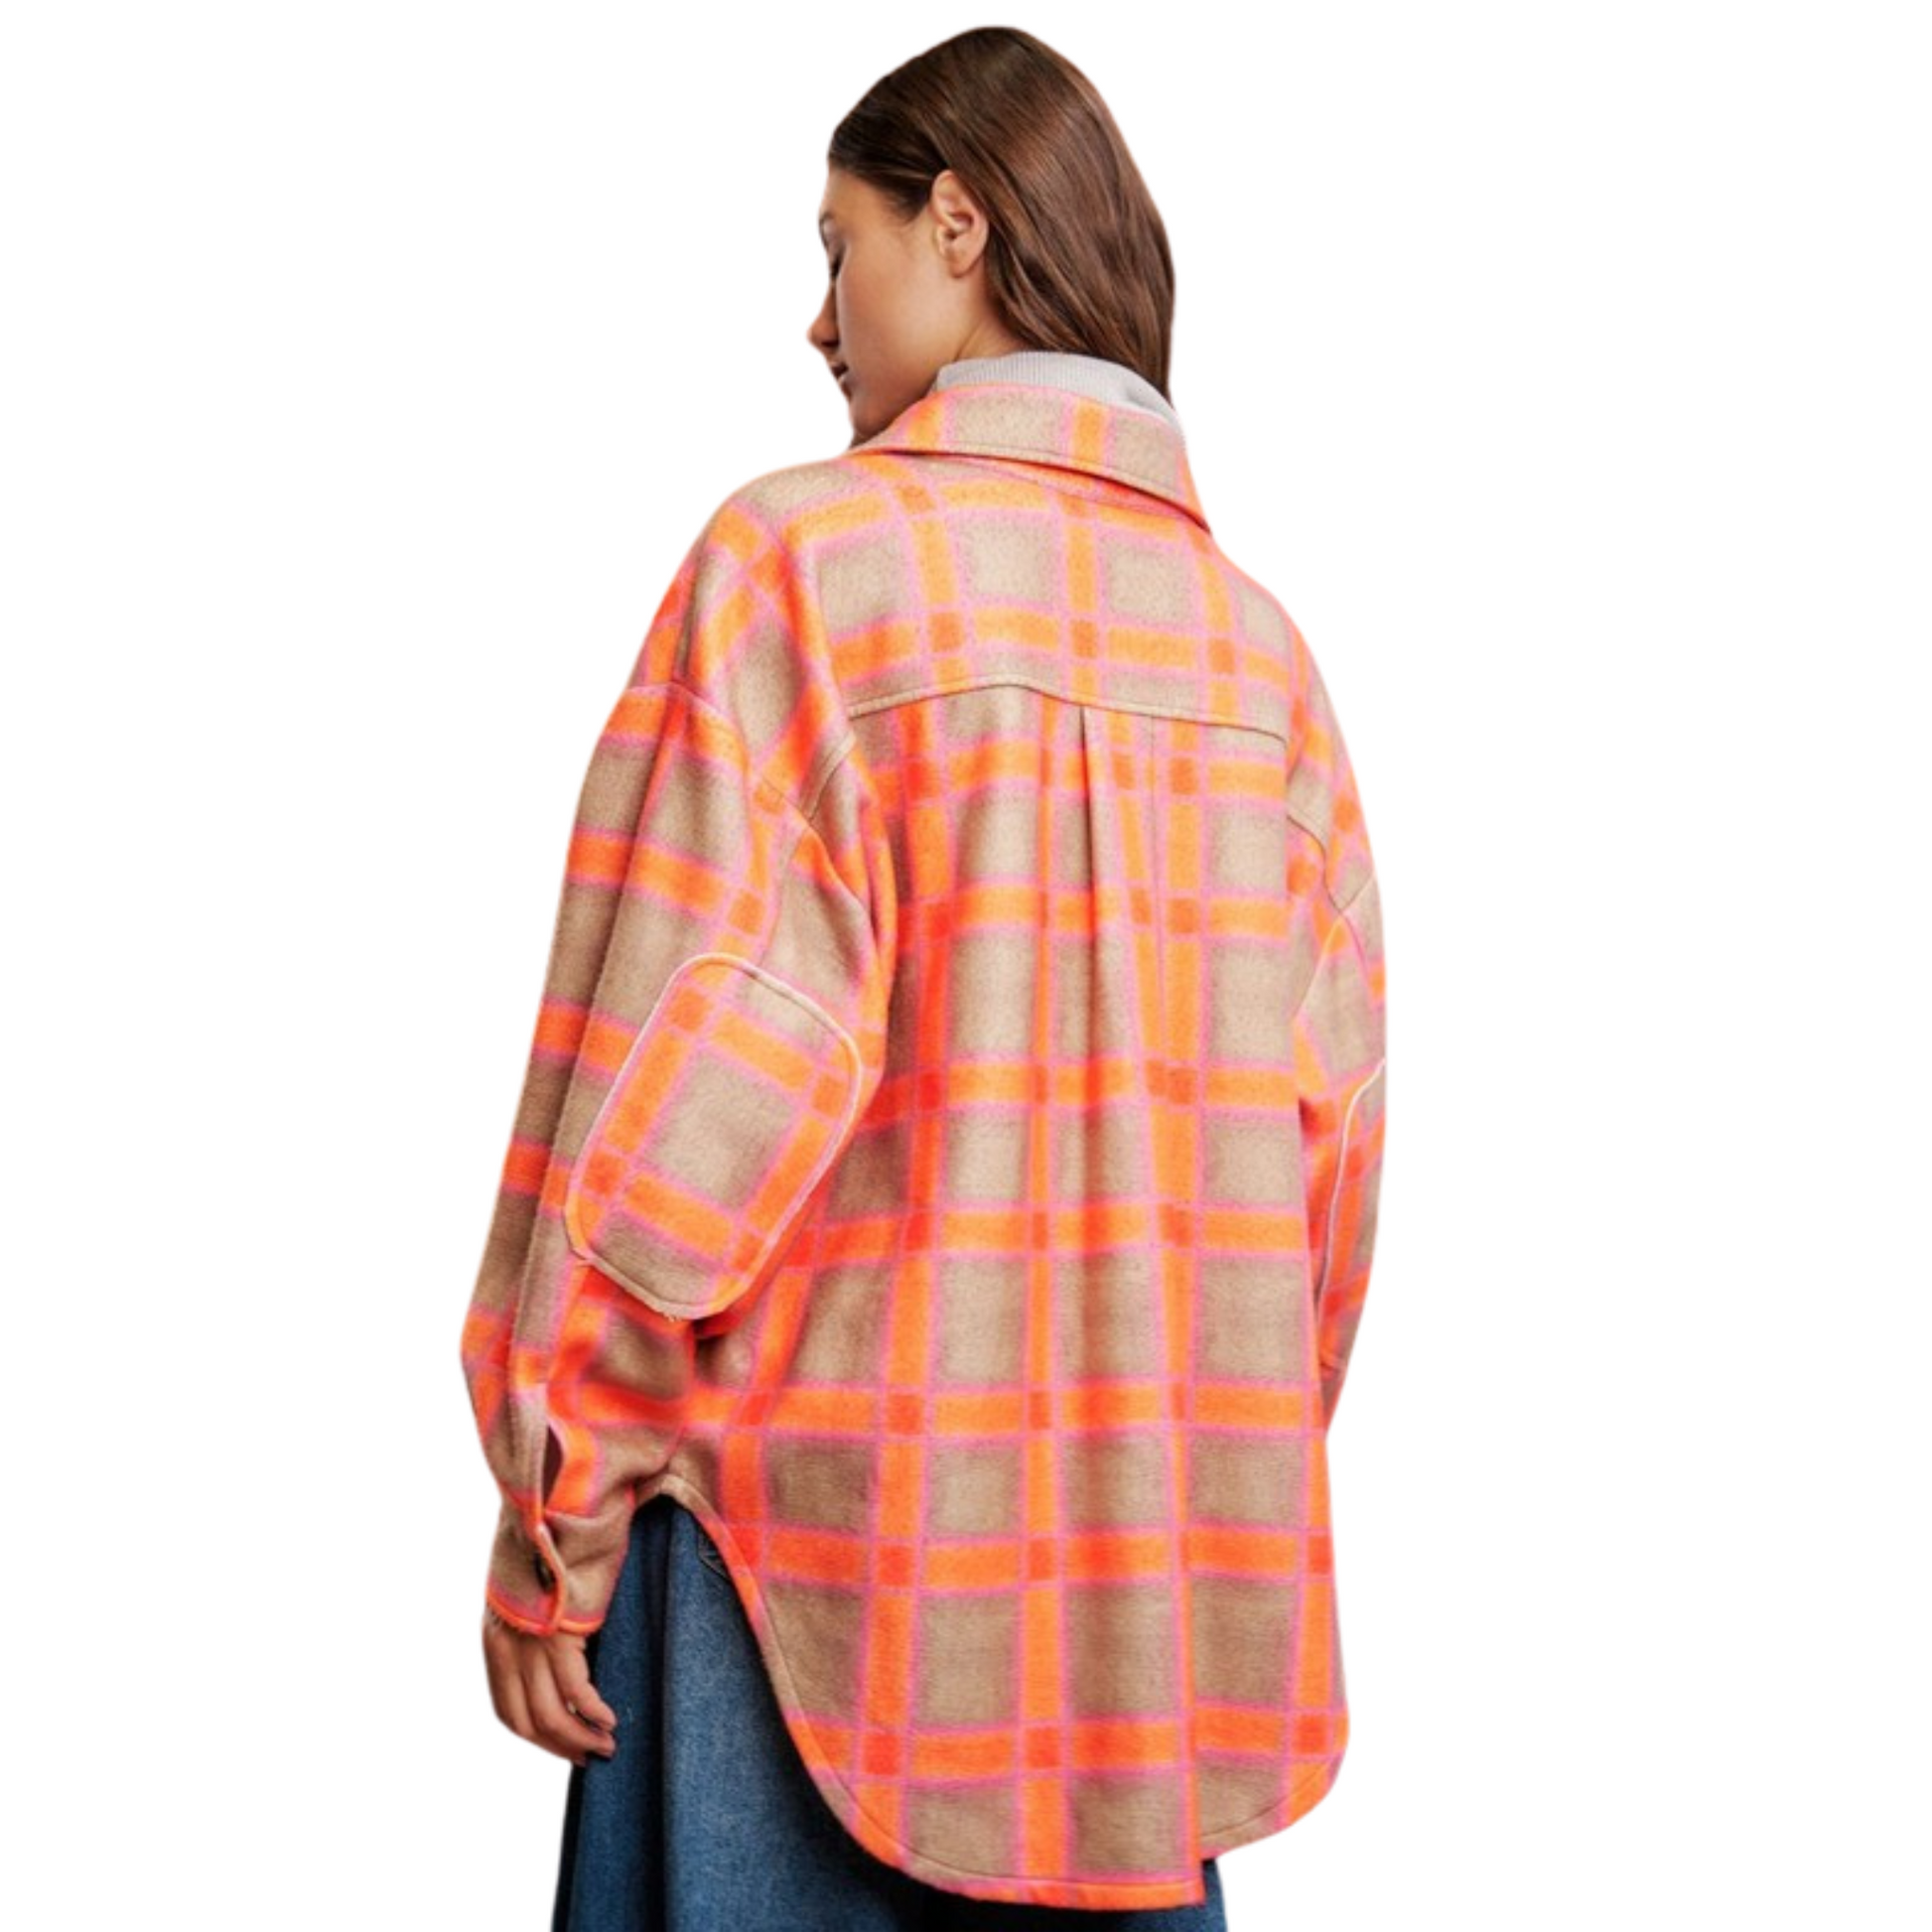 Stay warm in style with this pink and orange Plaid Contrast Shacket. Crafted from fluffy TEDDY BEAR FAUX FUR and featuring a buttoned front closure, this chic shacket adds a cozy layer to your look. Perfect for cold winter days.